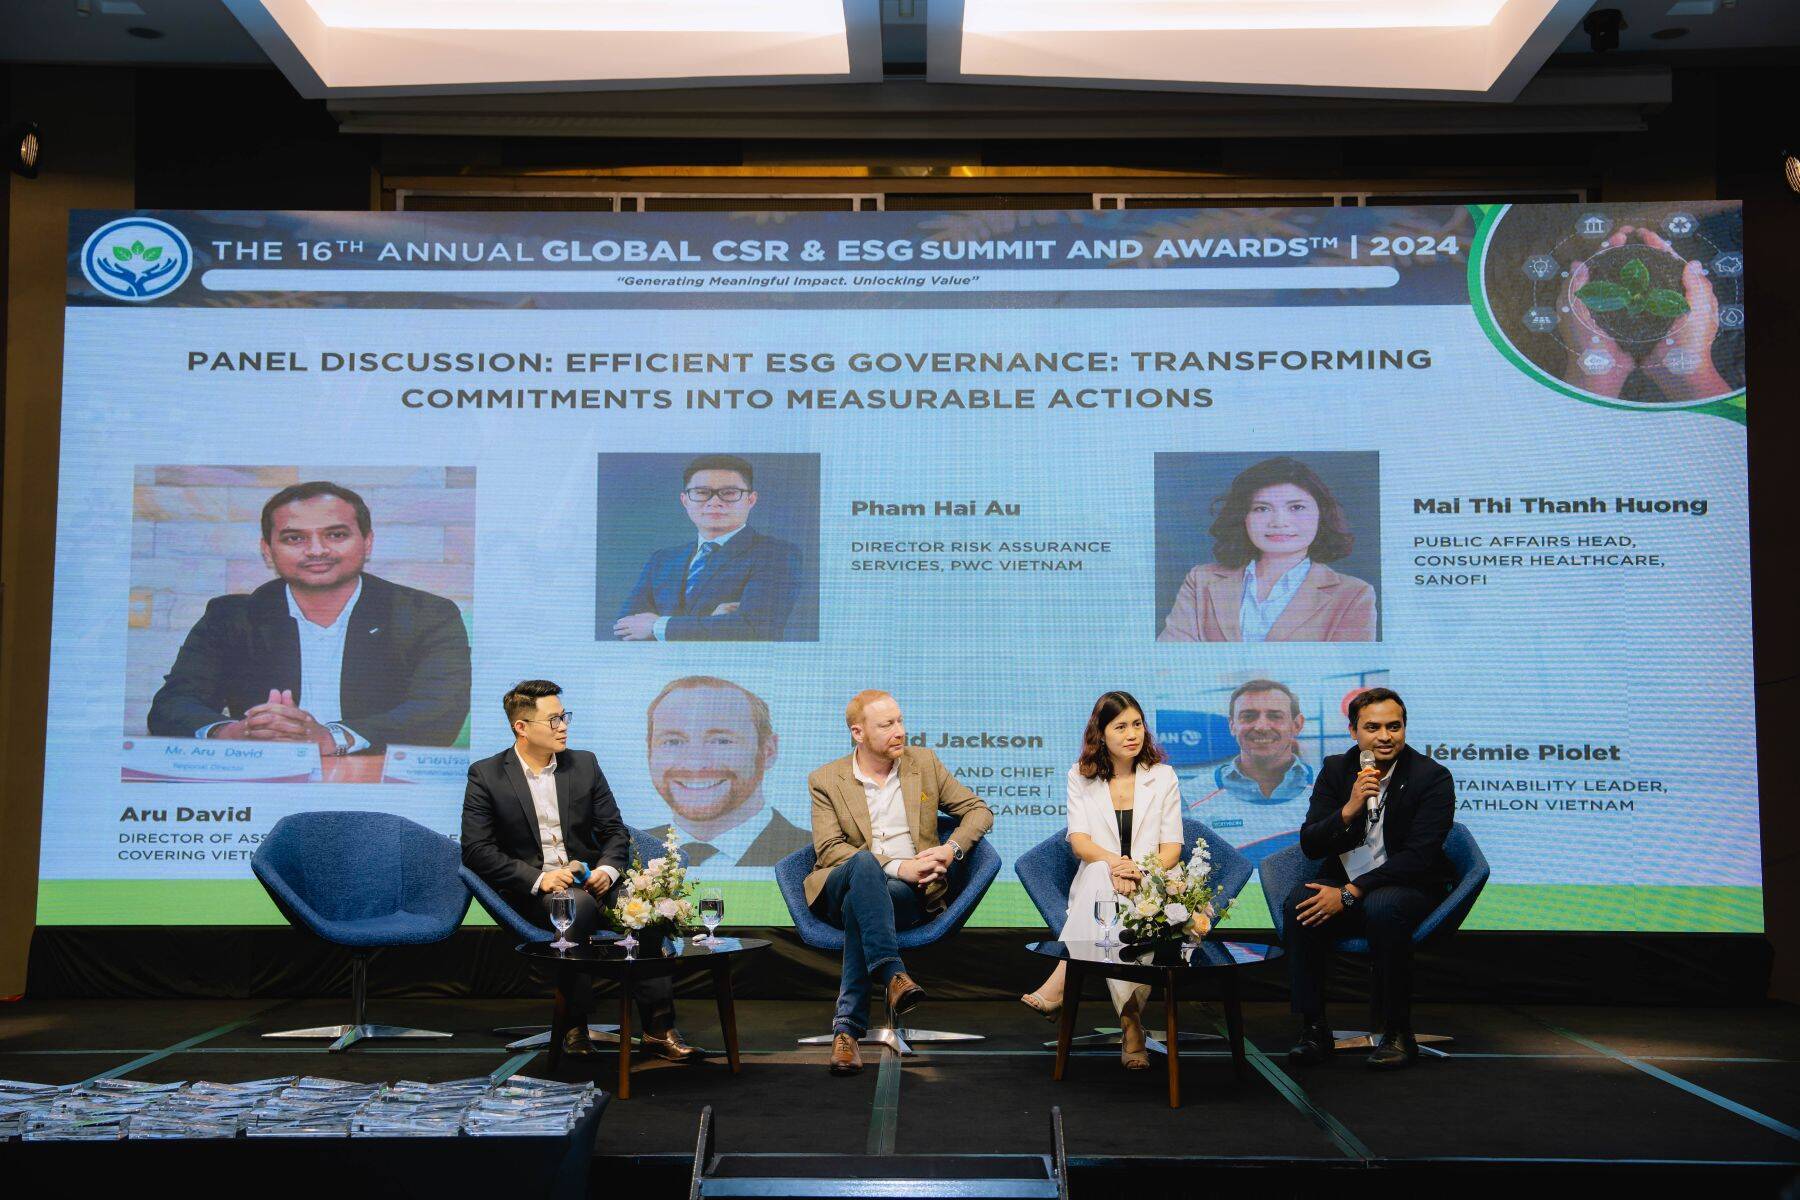 The 16th Annual Global CSR & ESG Summit & Awards 2024: Celebrating Sustainable Leadership and Innovation, 25 April 2024<BR />